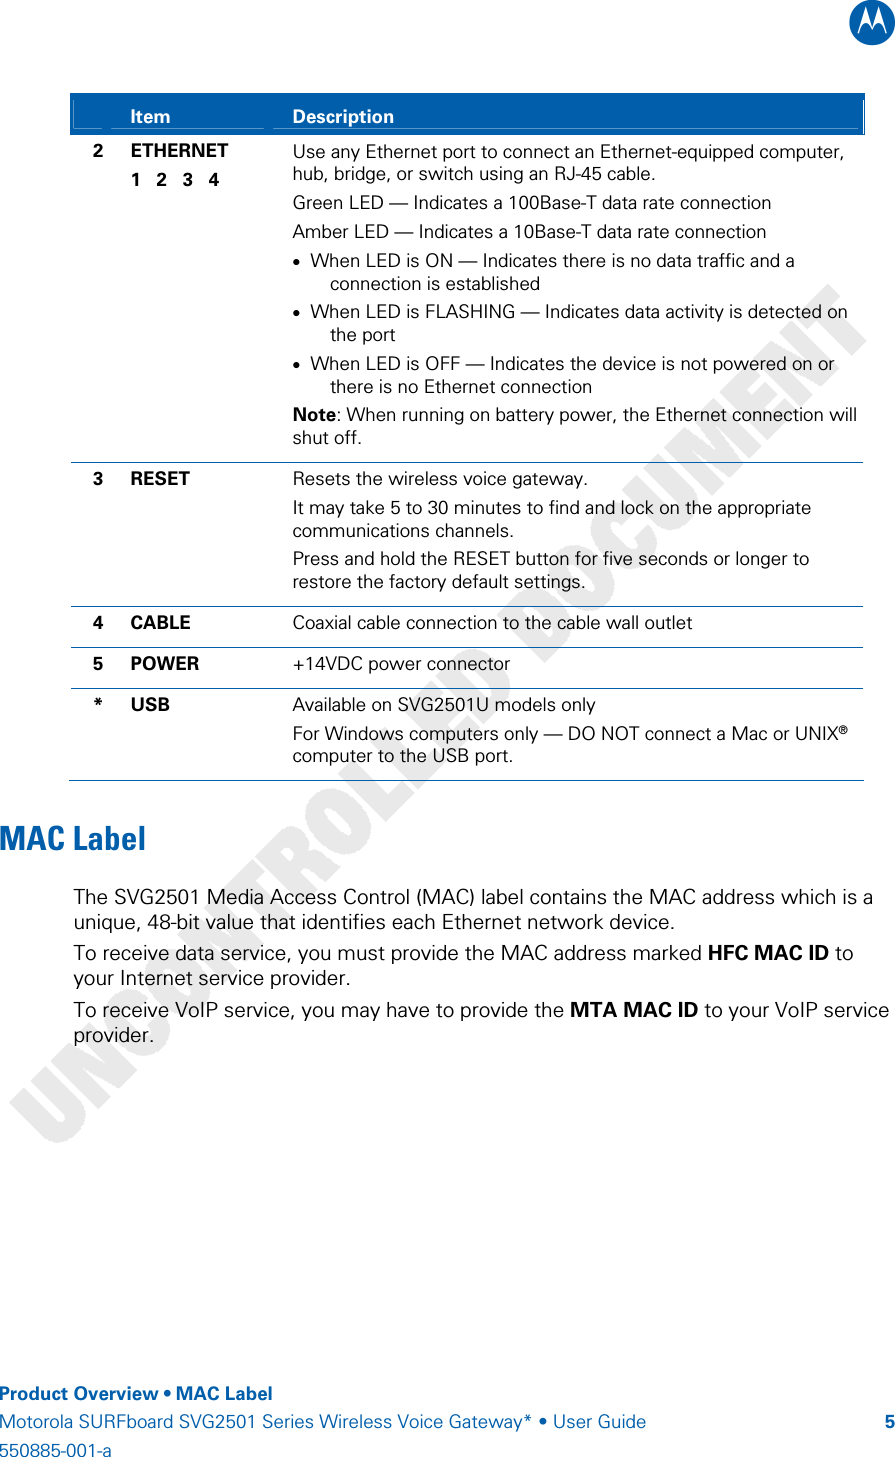 B    Product Overview • MAC Label Motorola SURFboard SVG2501 Series Wireless Voice Gateway* • User Guide  5550885-001-a    Item  Description 2 ETHERNET 1   2   3   4 Use any Ethernet port to connect an Ethernet-equipped computer, hub, bridge, or switch using an RJ-45 cable. Green LED — Indicates a 100Base-T data rate connection Amber LED — Indicates a 10Base-T data rate connection • When LED is ON — Indicates there is no data traffic and a connection is established • When LED is FLASHING — Indicates data activity is detected on the port • When LED is OFF — Indicates the device is not powered on or there is no Ethernet connection Note: When running on battery power, the Ethernet connection will shut off. 3 RESET  Resets the wireless voice gateway.  It may take 5 to 30 minutes to find and lock on the appropriate communications channels. Press and hold the RESET button for five seconds or longer to restore the factory default settings. 4 CABLE  Coaxial cable connection to the cable wall outlet 5 POWER  +14VDC power connector * USB  Available on SVG2501U models only For Windows computers only — DO NOT connect a Mac or UNIX® computer to the USB port. MAC Label  The SVG2501 Media Access Control (MAC) label contains the MAC address which is a unique, 48-bit value that identifies each Ethernet network device.  To receive data service, you must provide the MAC address marked HFC MAC ID to your Internet service provider. To receive VoIP service, you may have to provide the MTA MAC ID to your VoIP service provider.